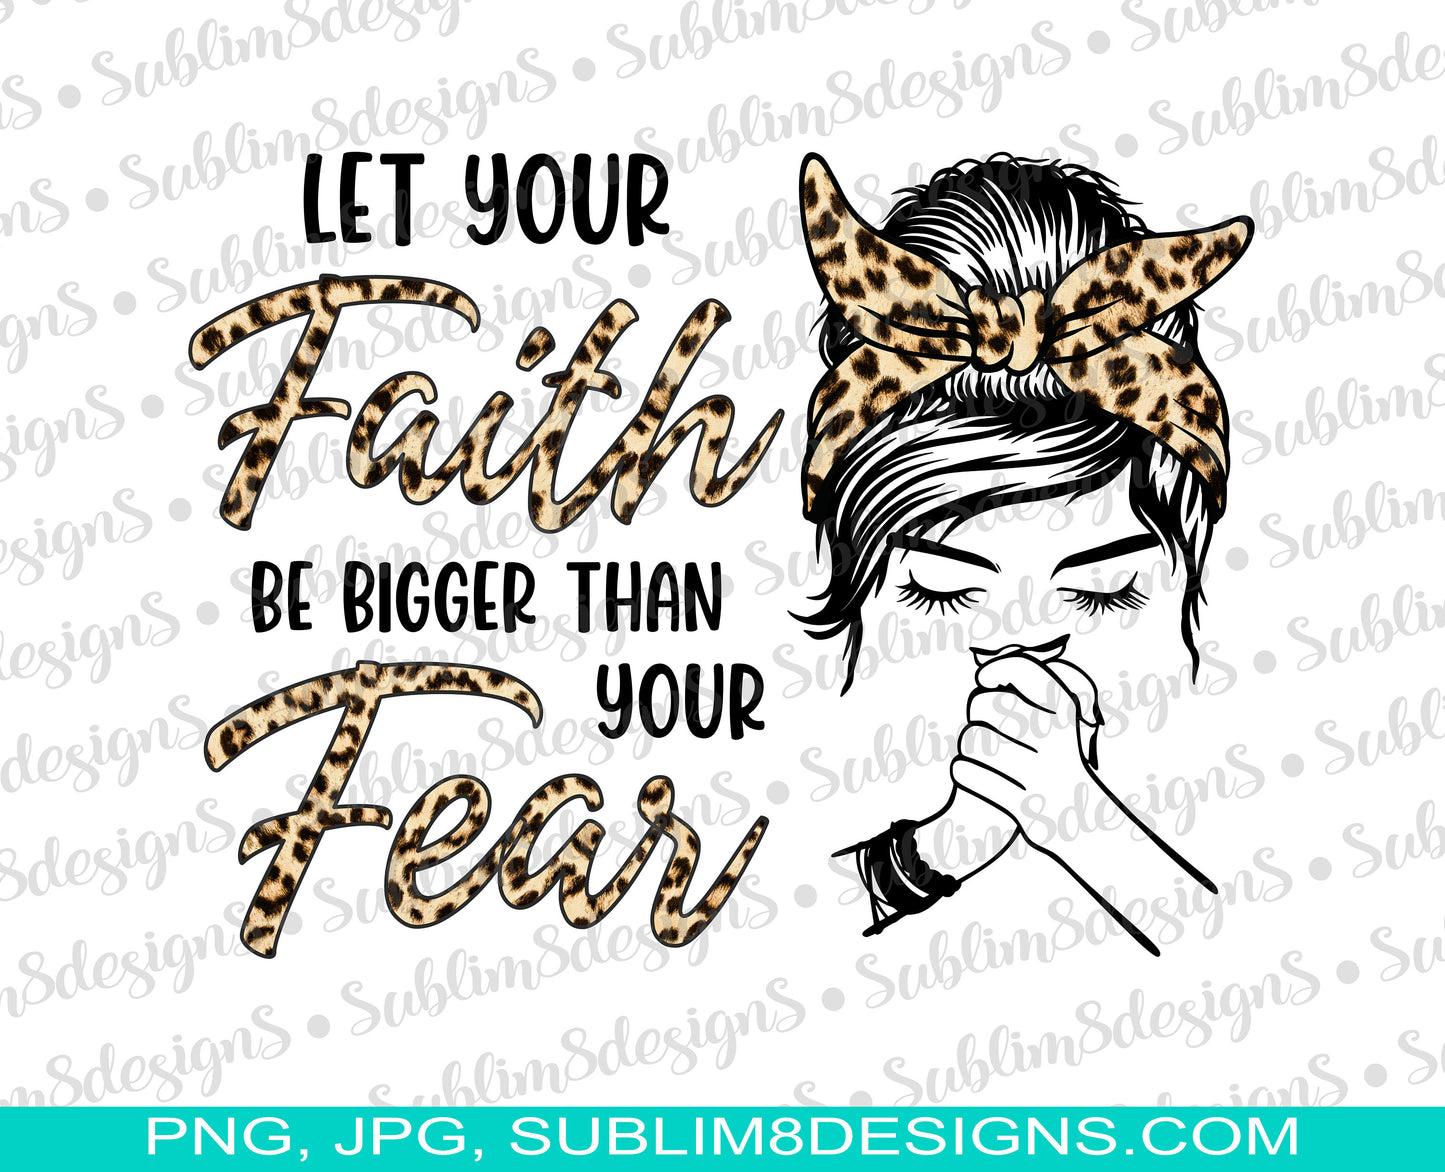 Let Your Faith Be Bigger Than Your Fear PNG and JPG ONLY